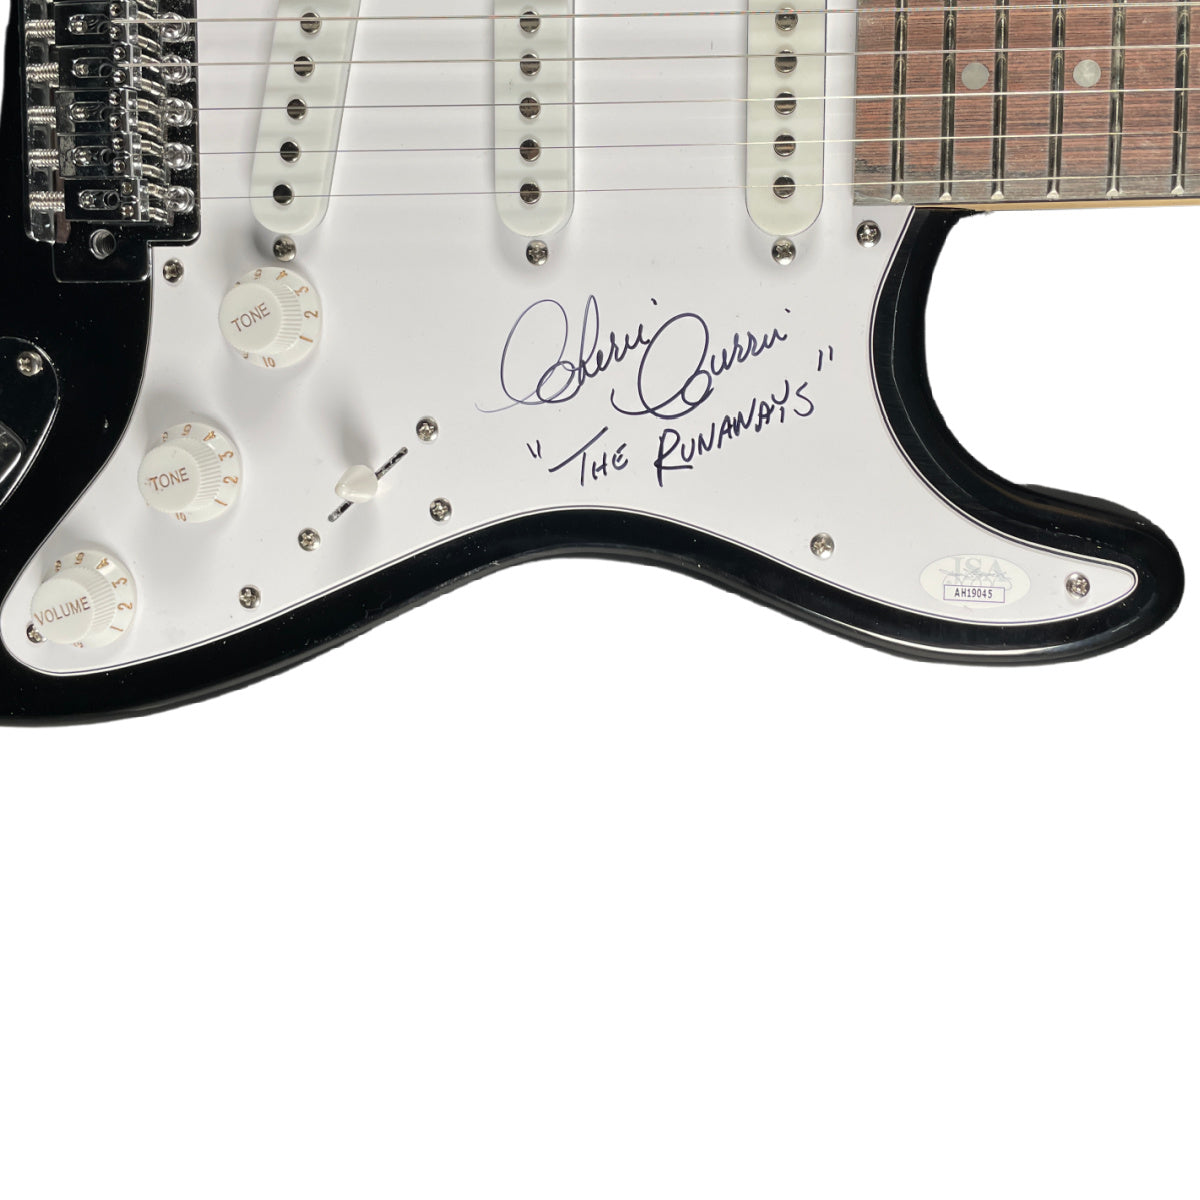 Cheri Currie The Runaways Signed Guitar Autographed JSA COA